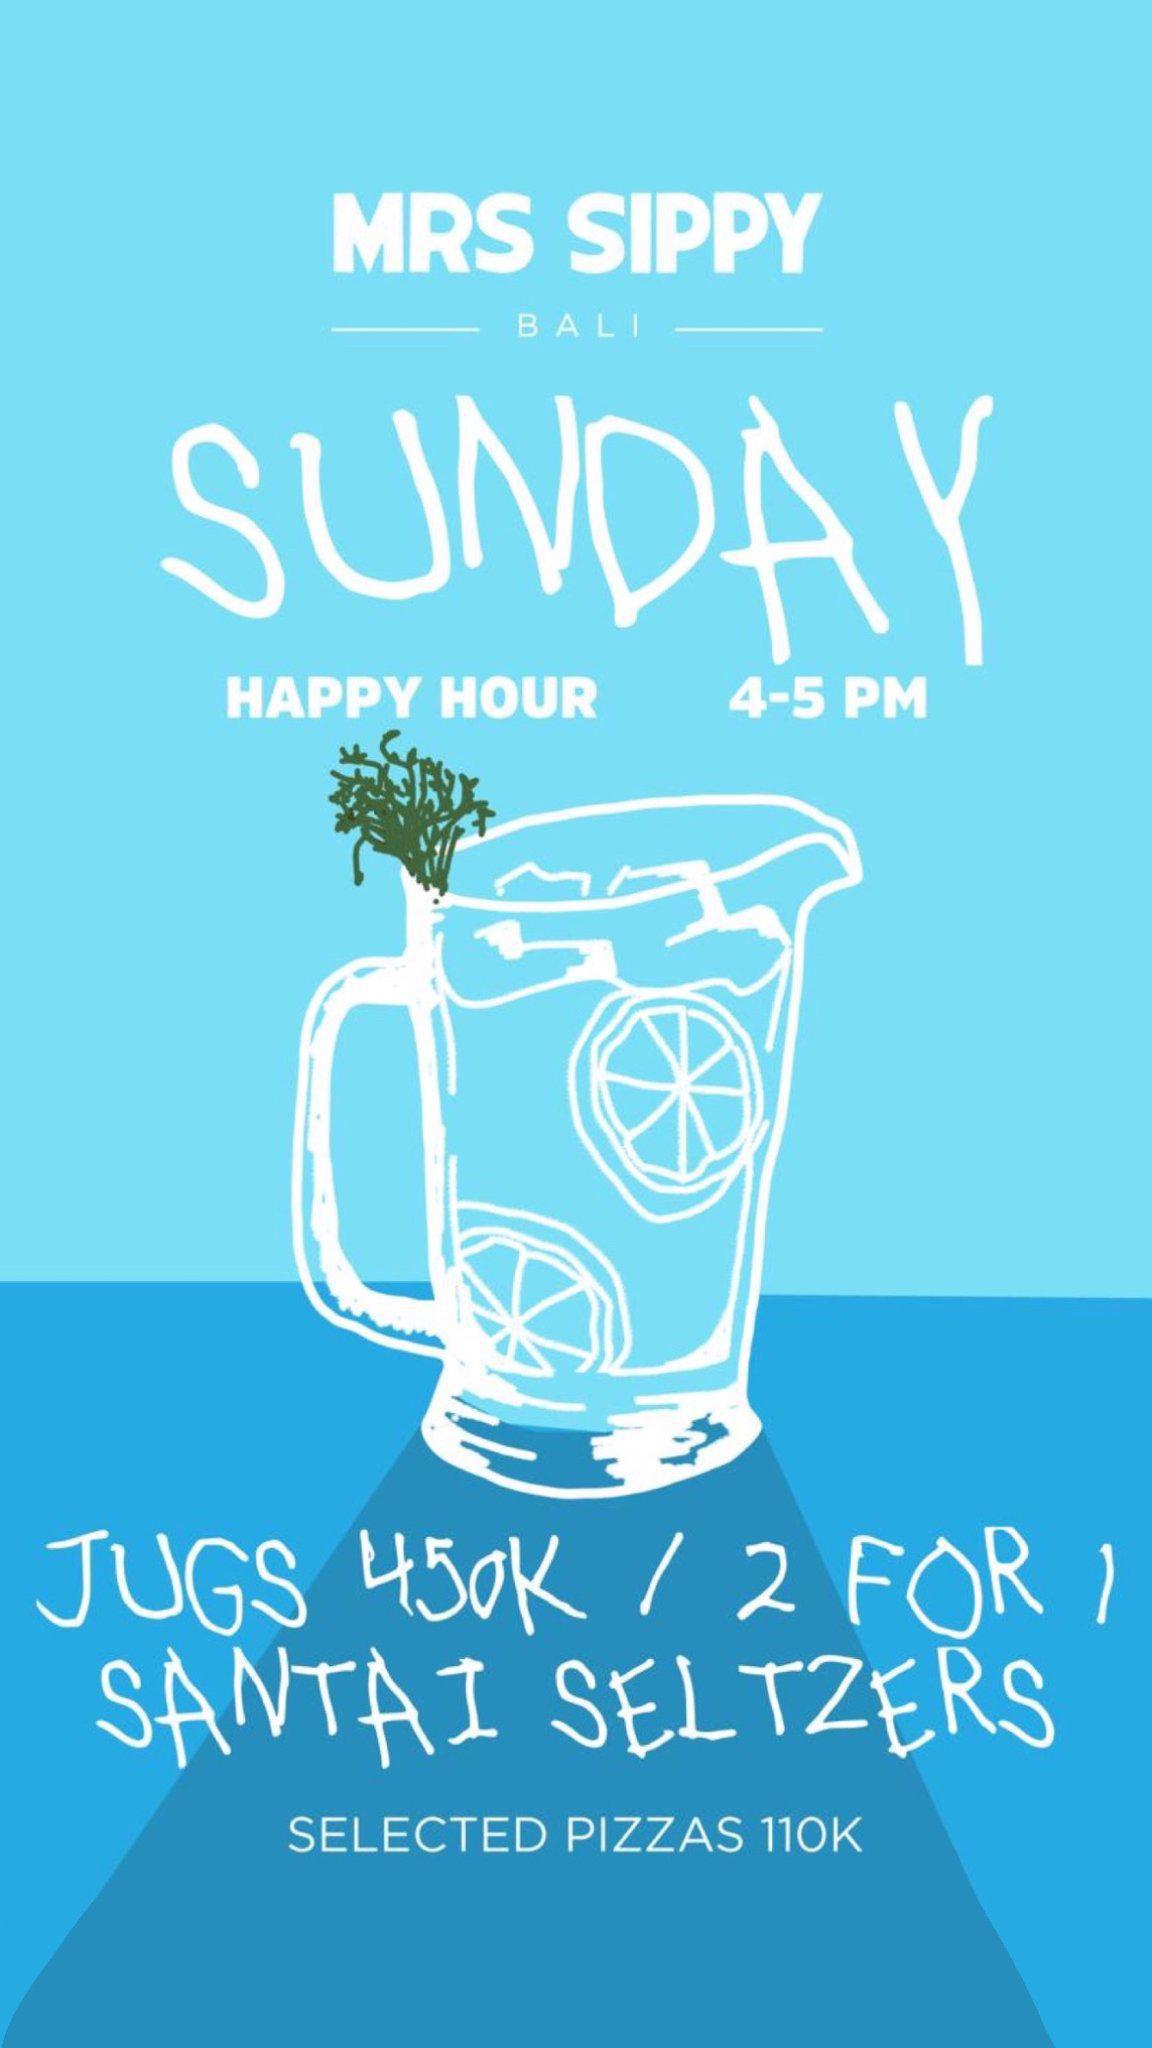 Sunday Happy Hour at Mrs Sippy Bali, 4-5pm